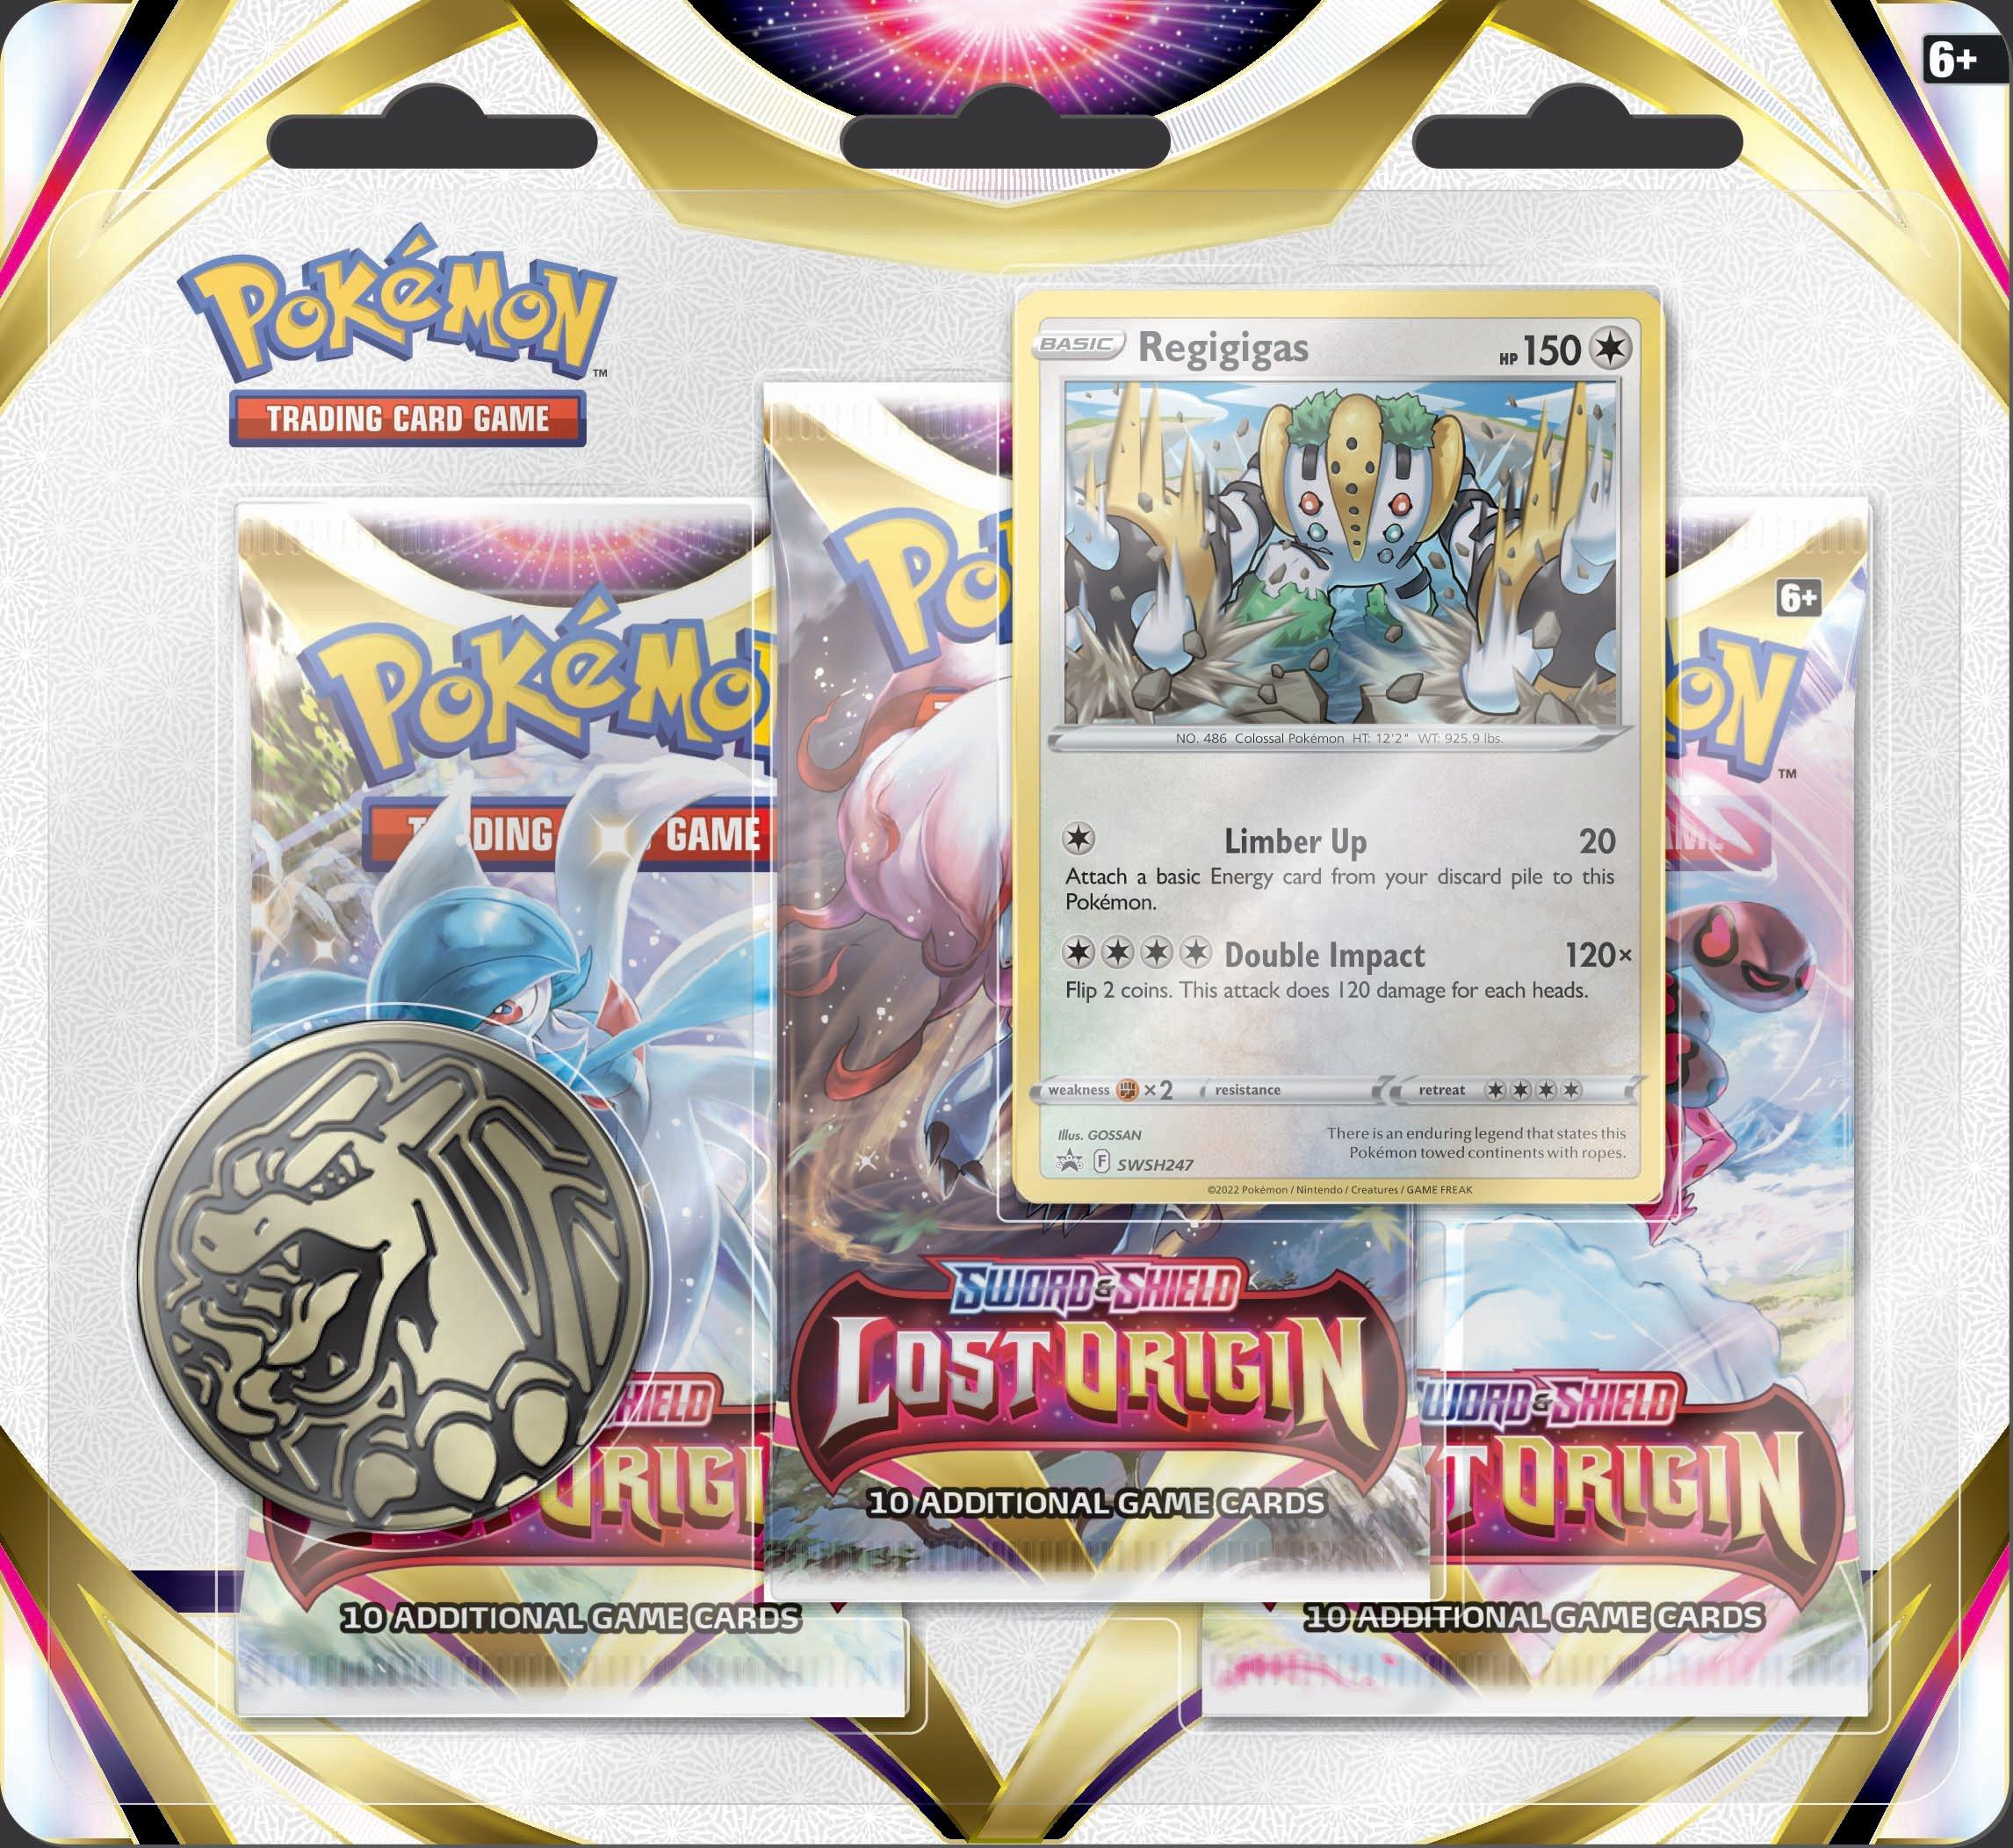 Pokemon Trading Card Game: Sword and Shield - LOST ORIGIN Booster 3-Pack